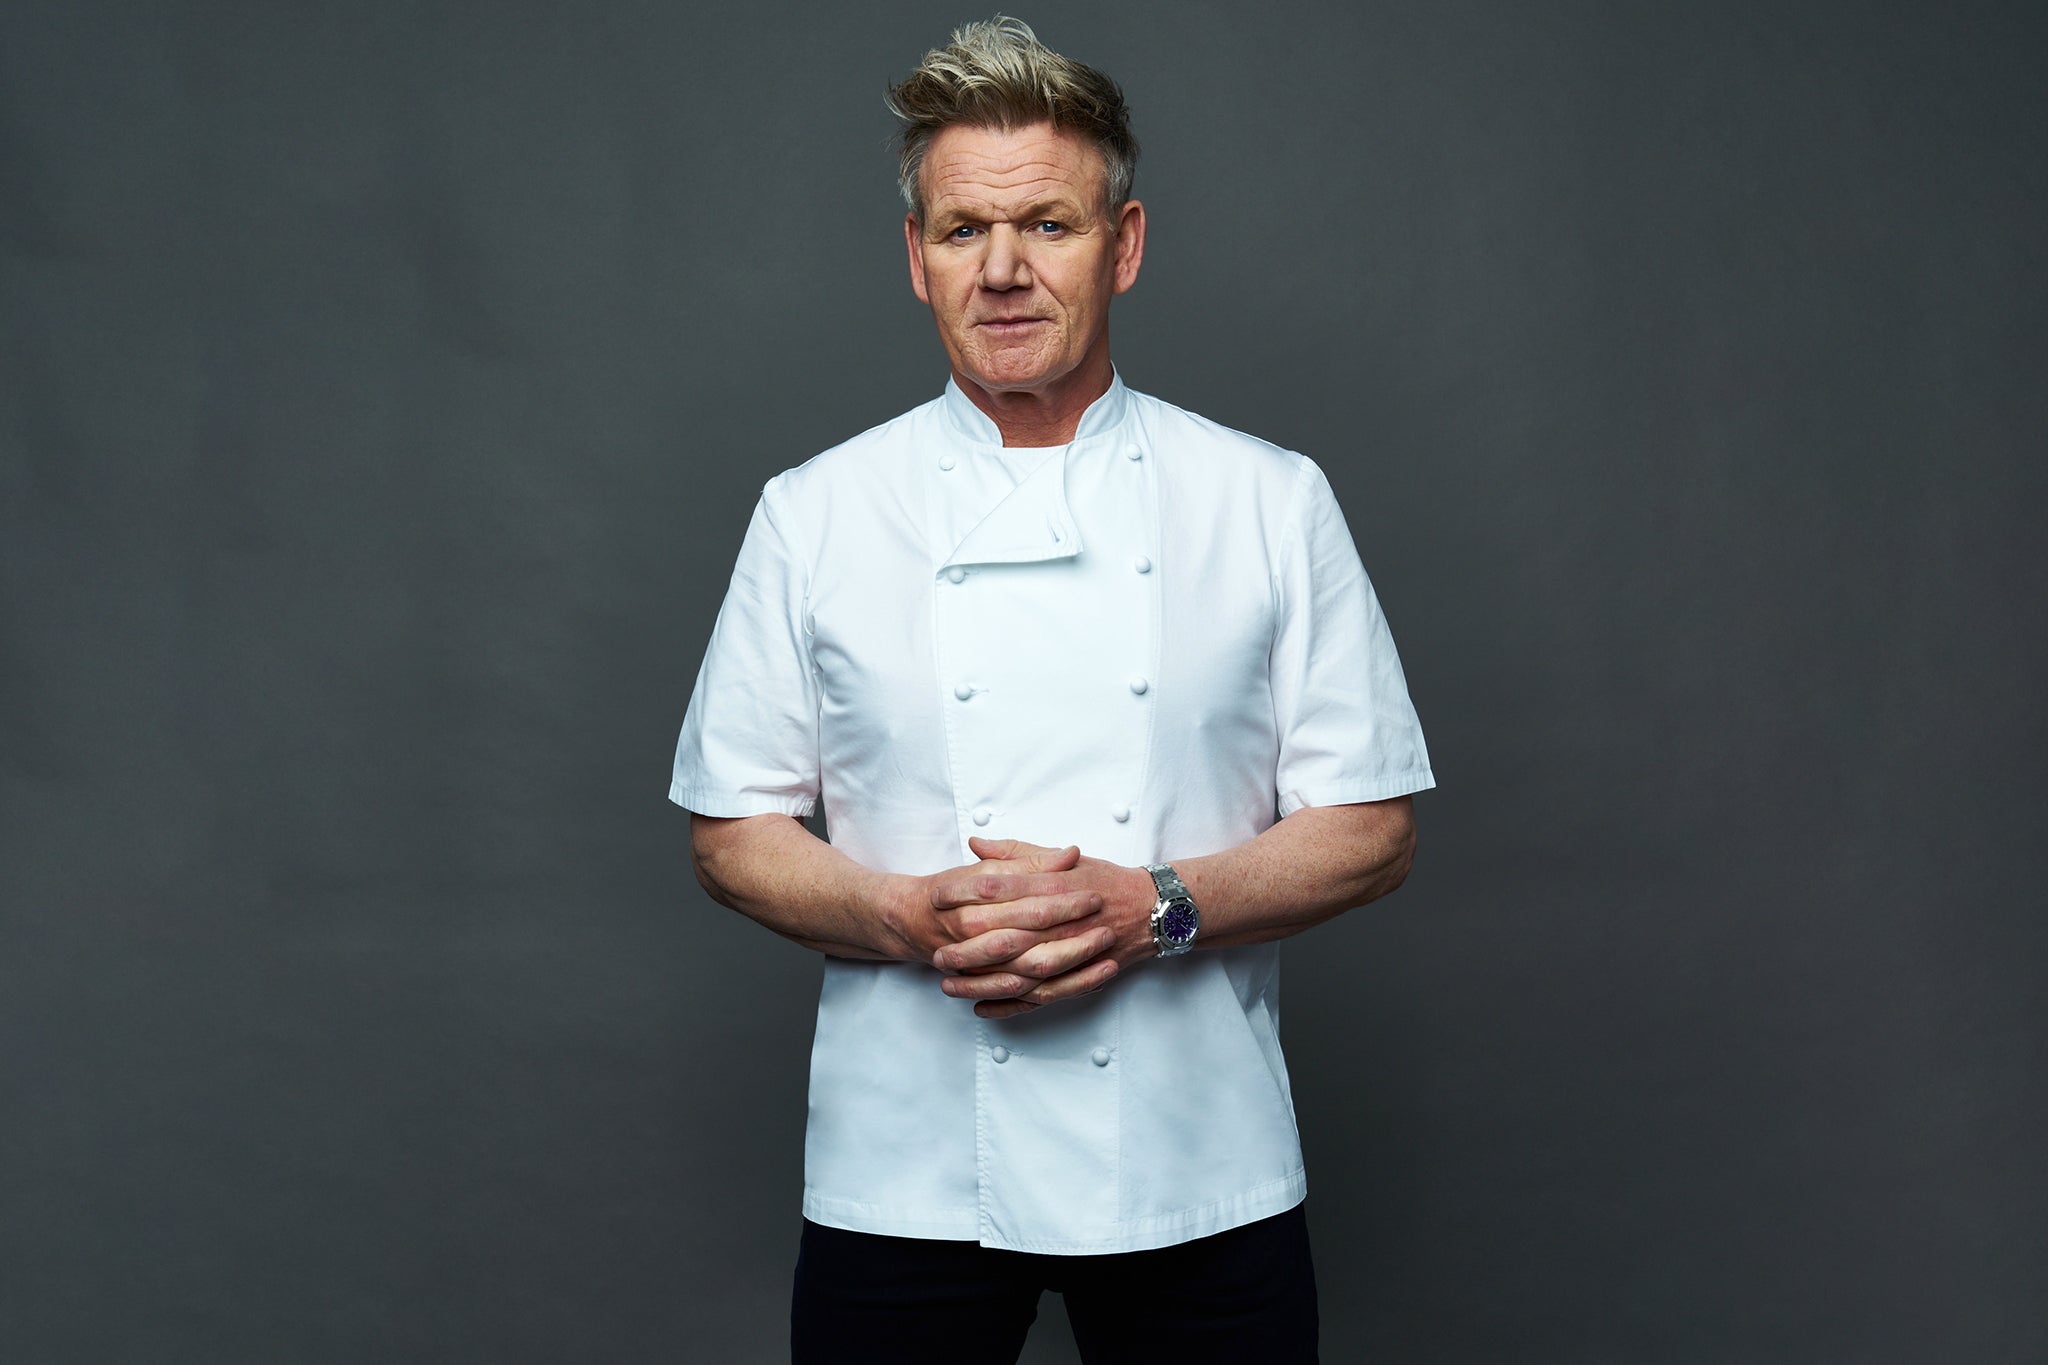 Yes, chef! There is no stopping Gordon Ramsay